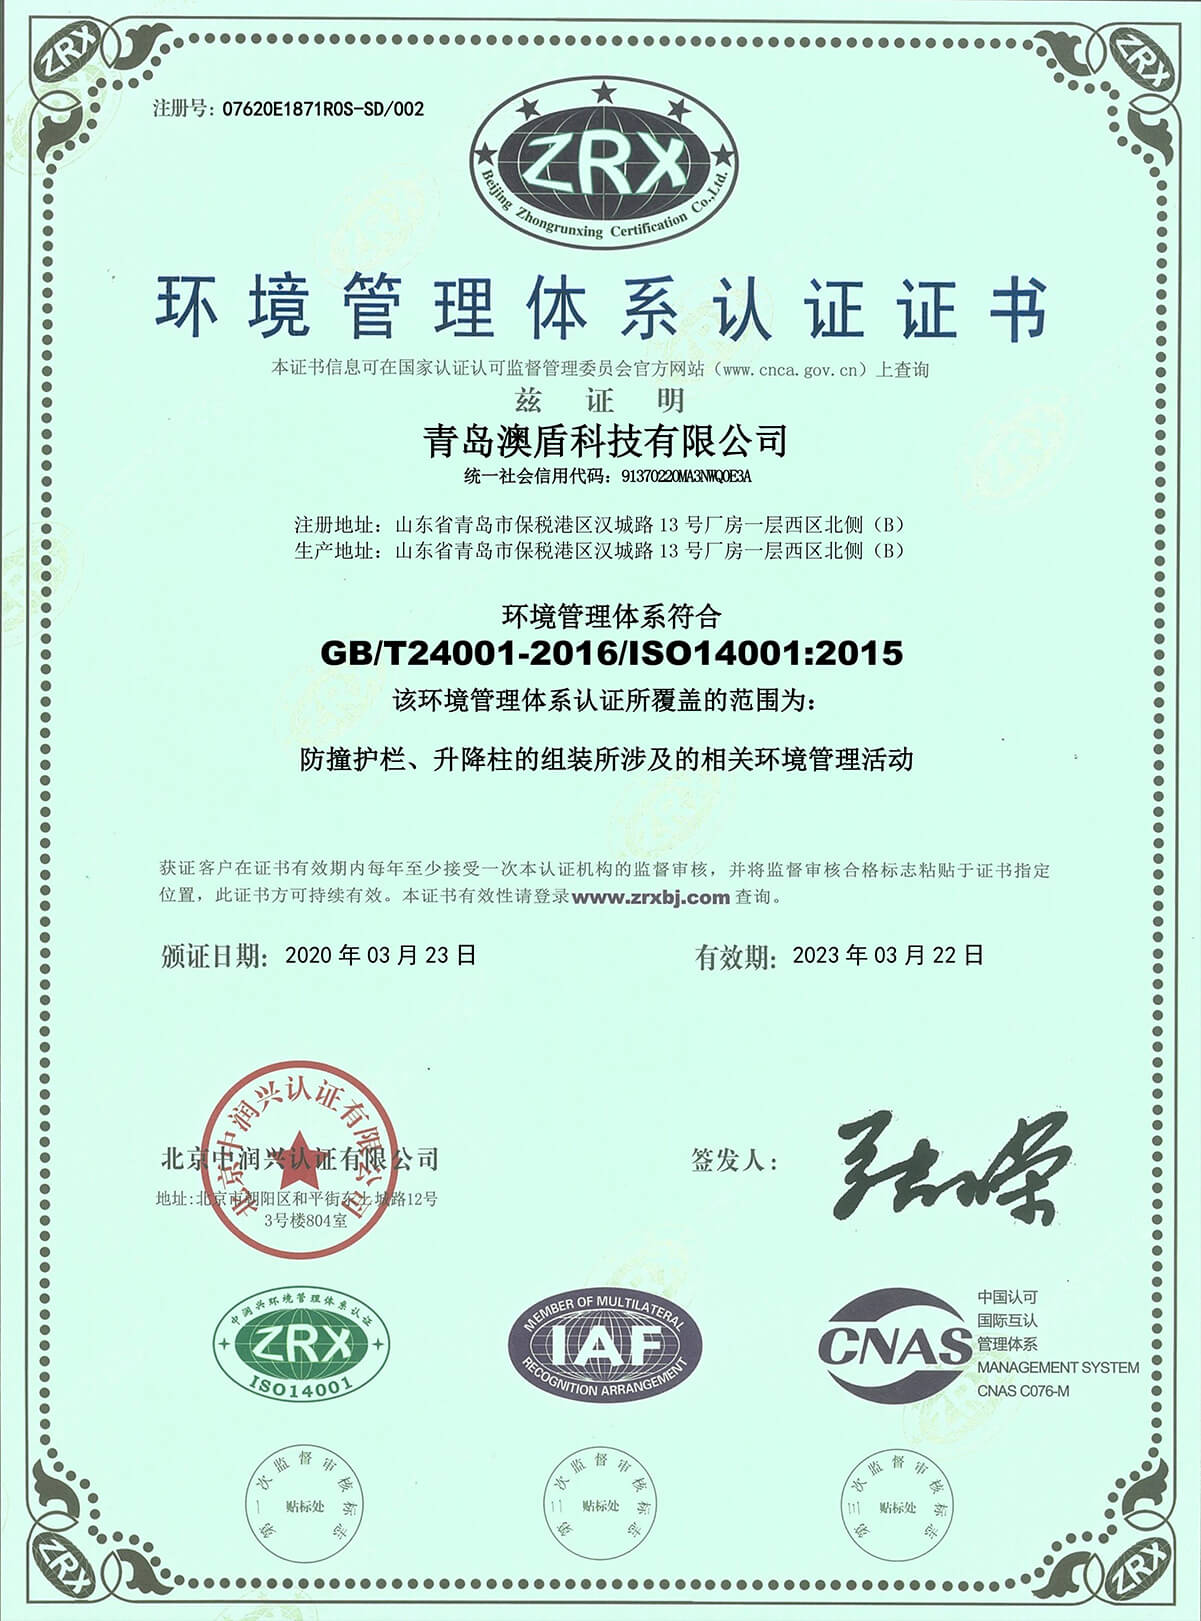 Aotons certificate